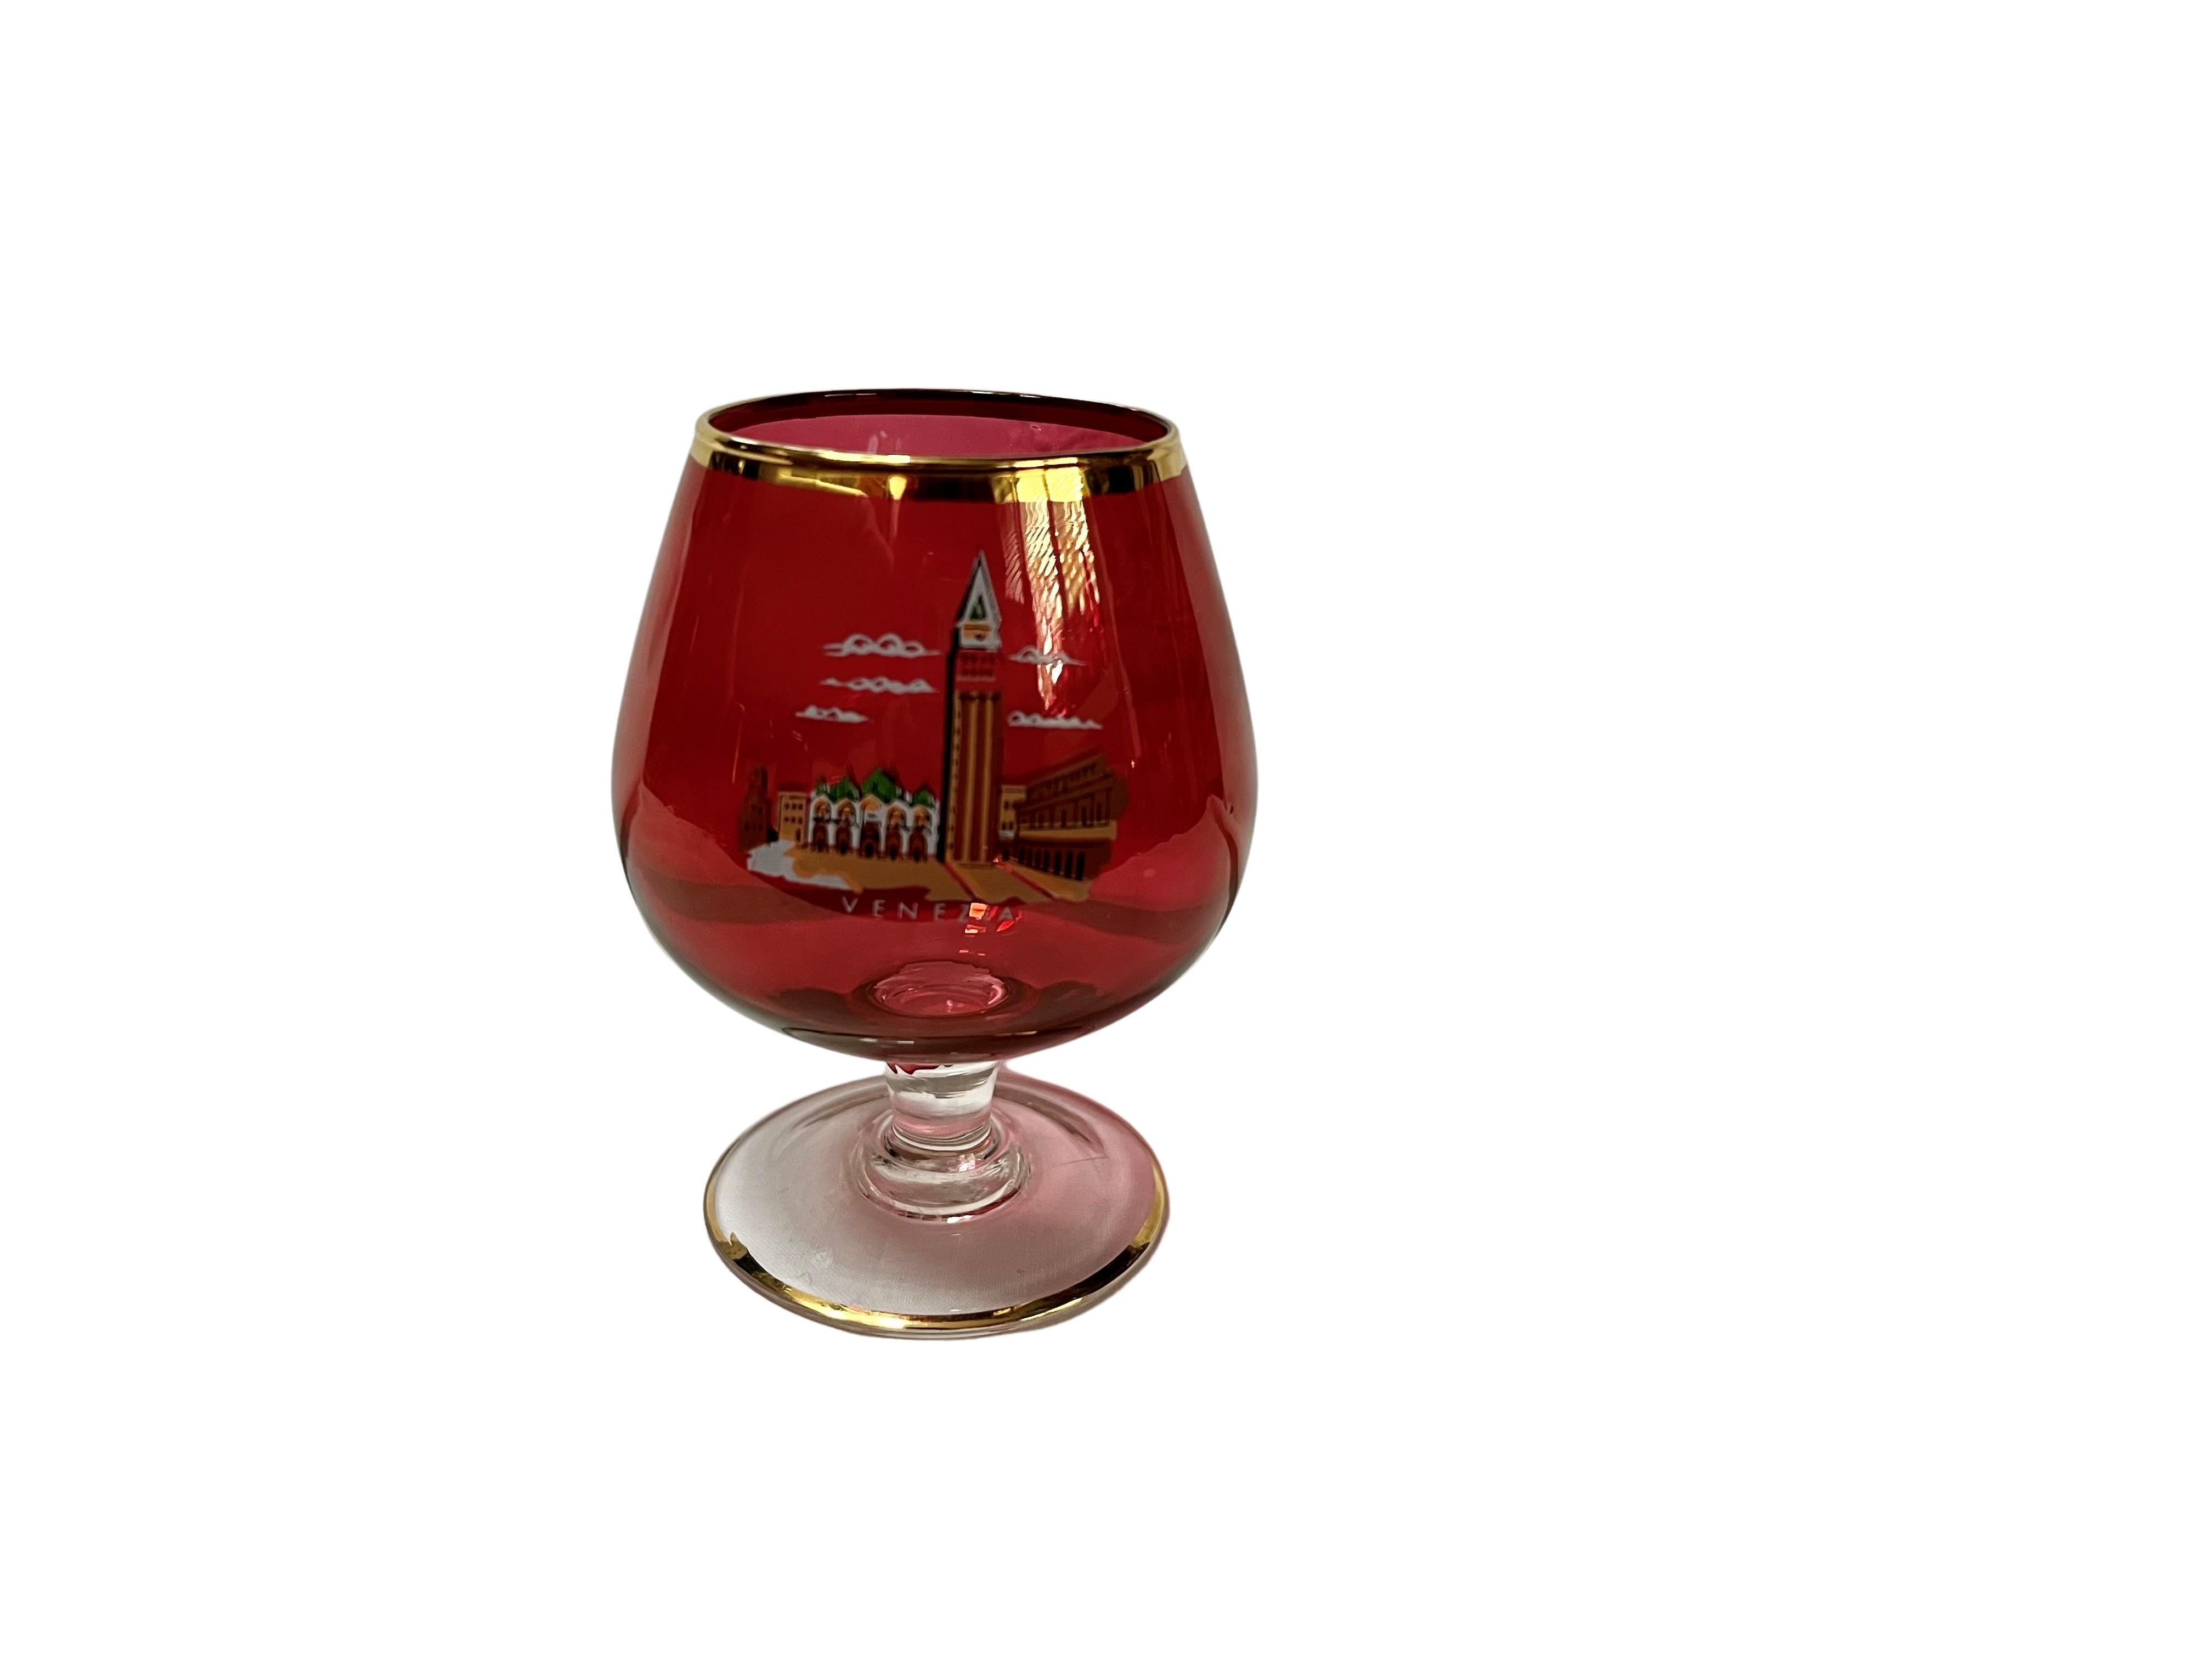 Very nice set of six glasses with the representation of the main sights of Venice, Italy. 

The cups have a base in round shape of colorless glass with a golden ring, which then merges into a bulbous shape that has a rubin red color.
The very nicely